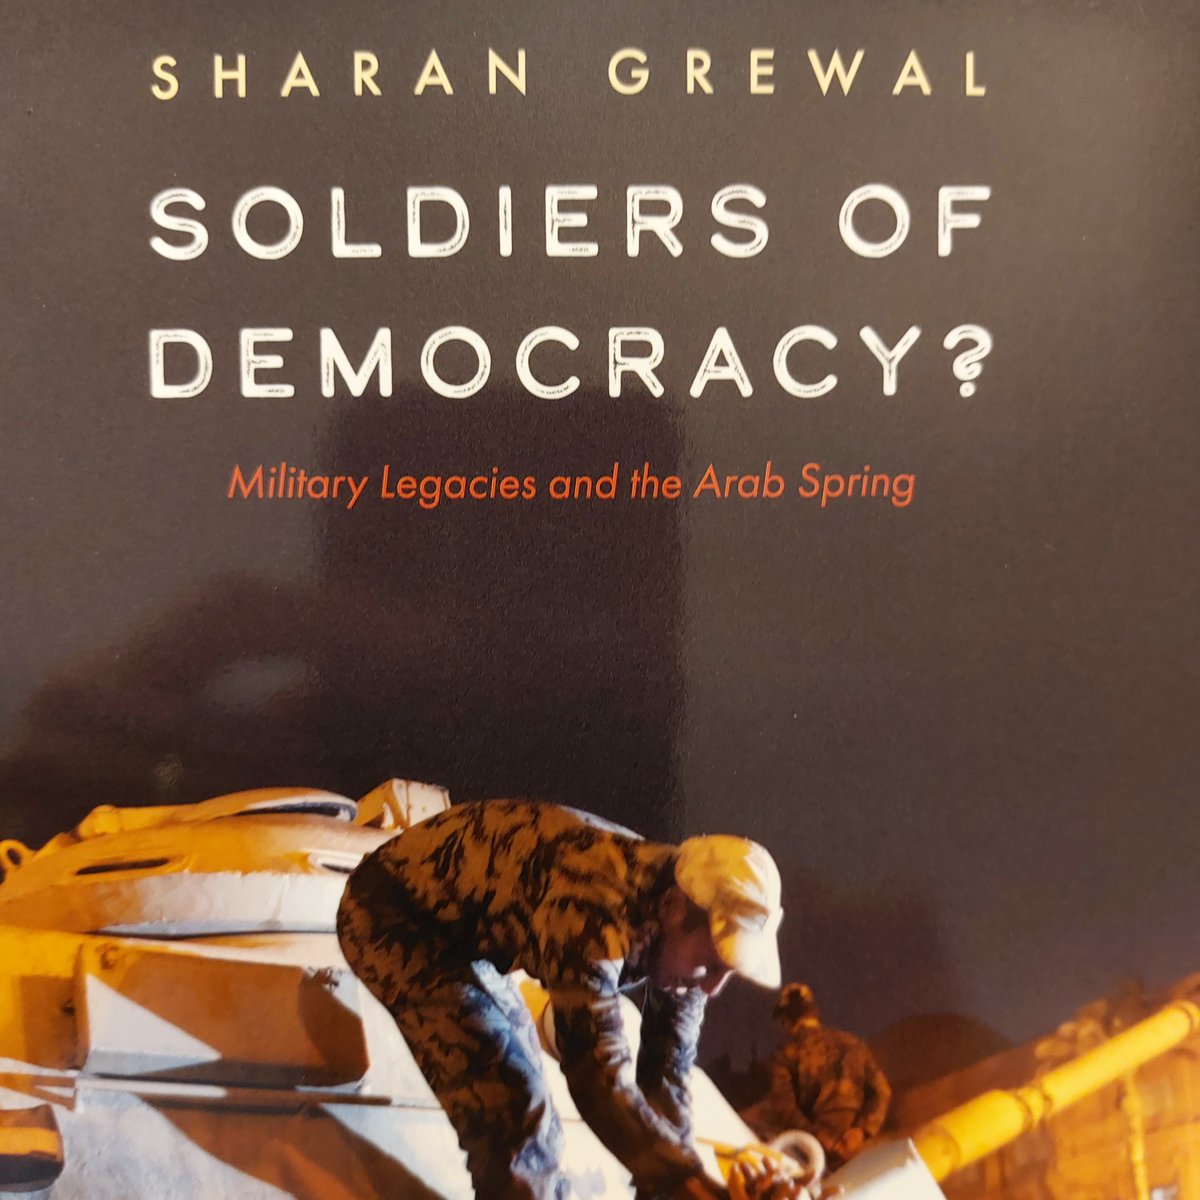 I can't wait until next Tuesday (2/13 at 5:30 p.m. EST) to discuss with @sh_grewal his recent book, which explains why some militaries support and others thwart democratic transitions. Register to attend in person or online. #Egypt #Tunisia #ArabSpring imes.elliott.gwu.edu/events/book-ta…